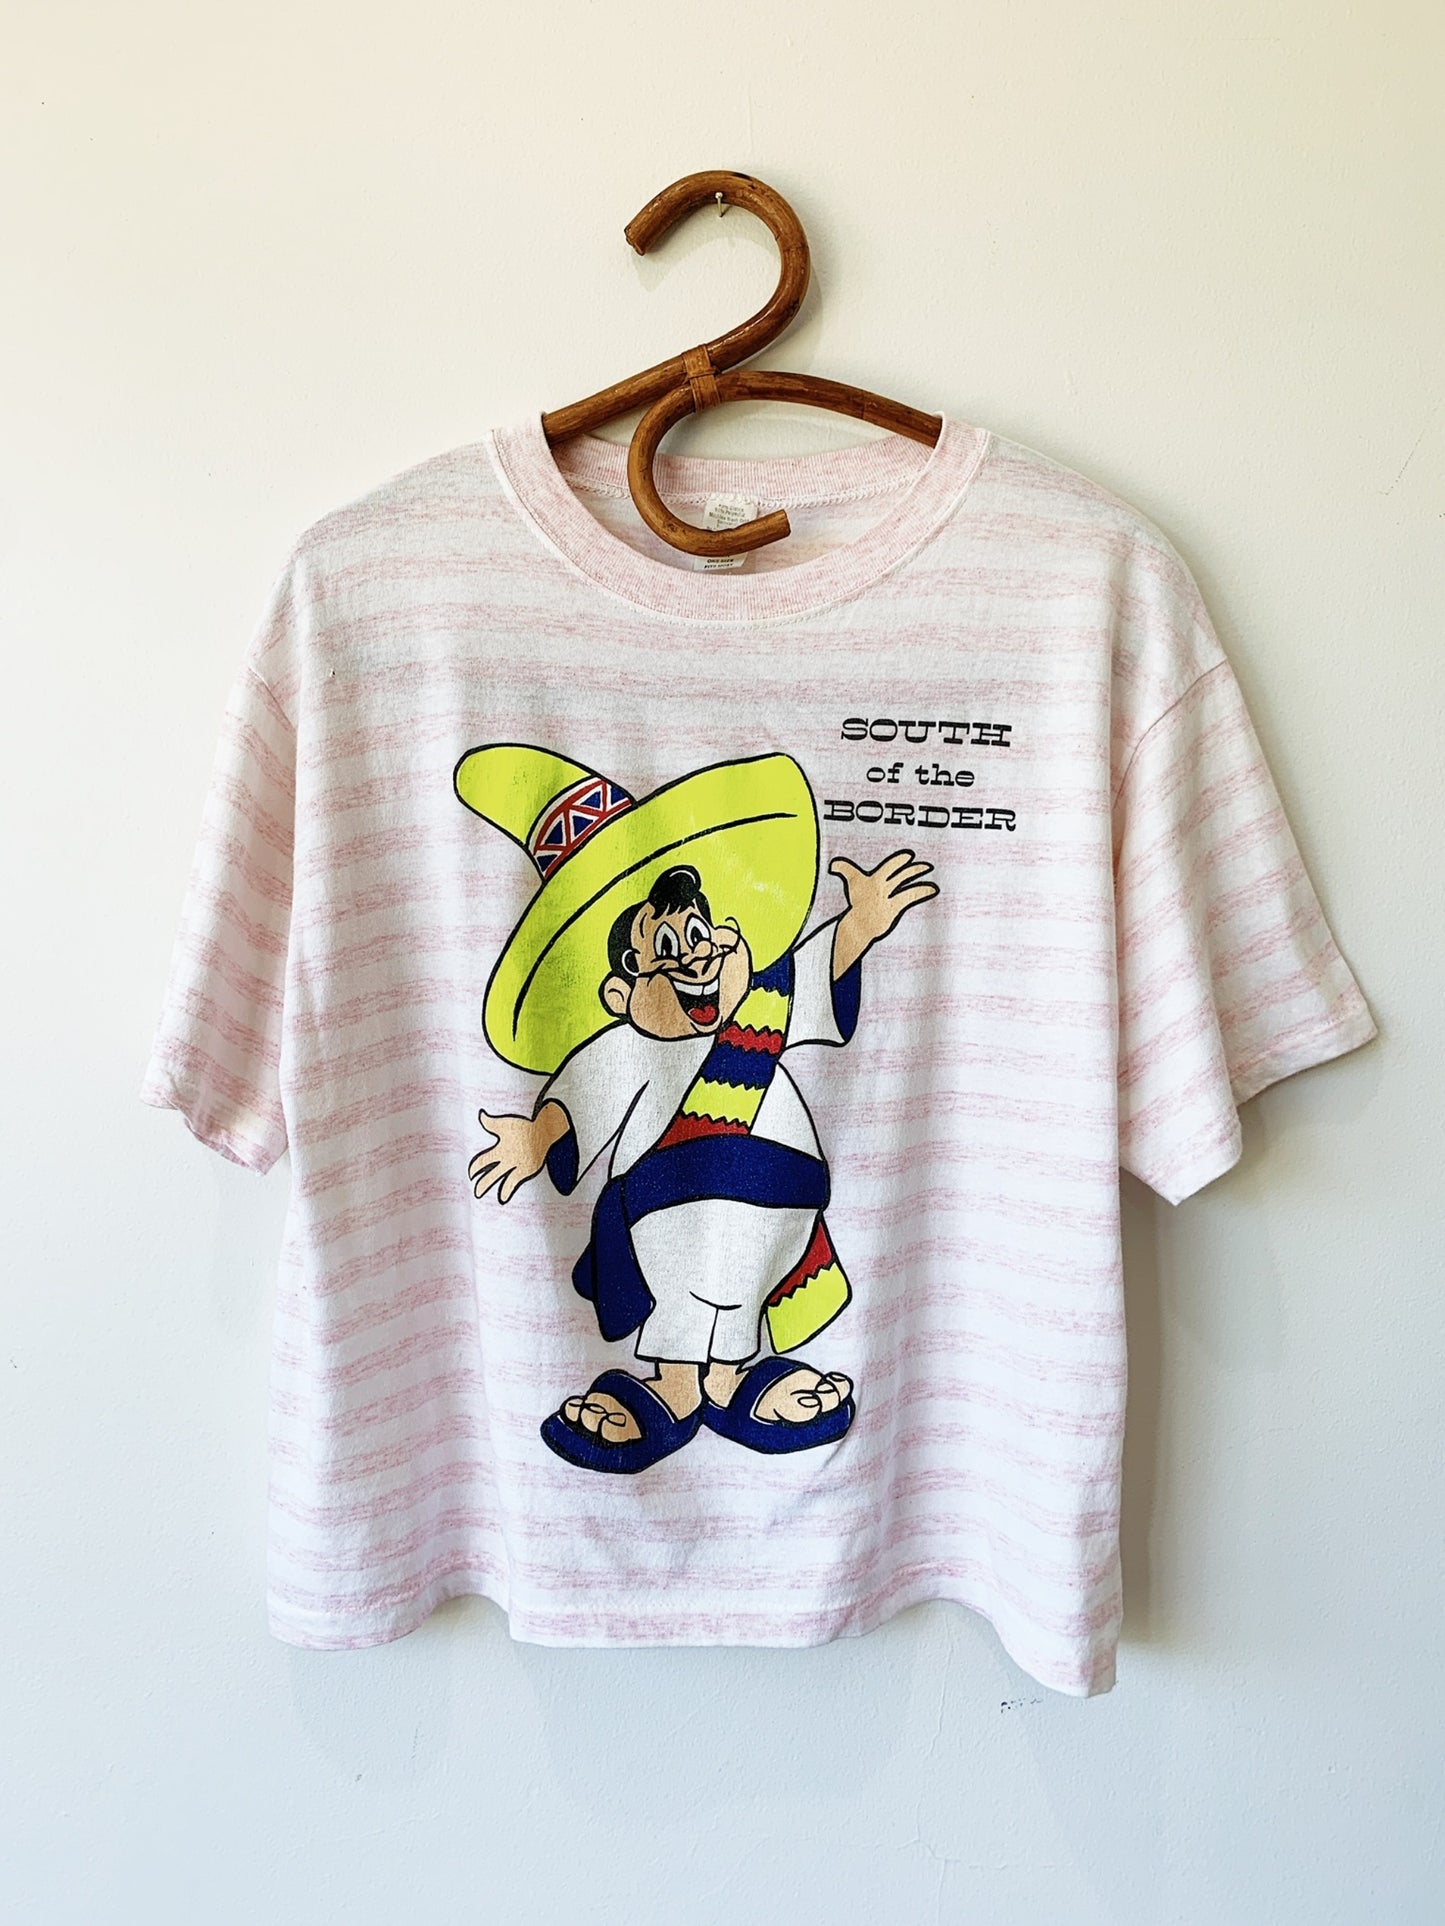 Vintage South Of The Border Tee